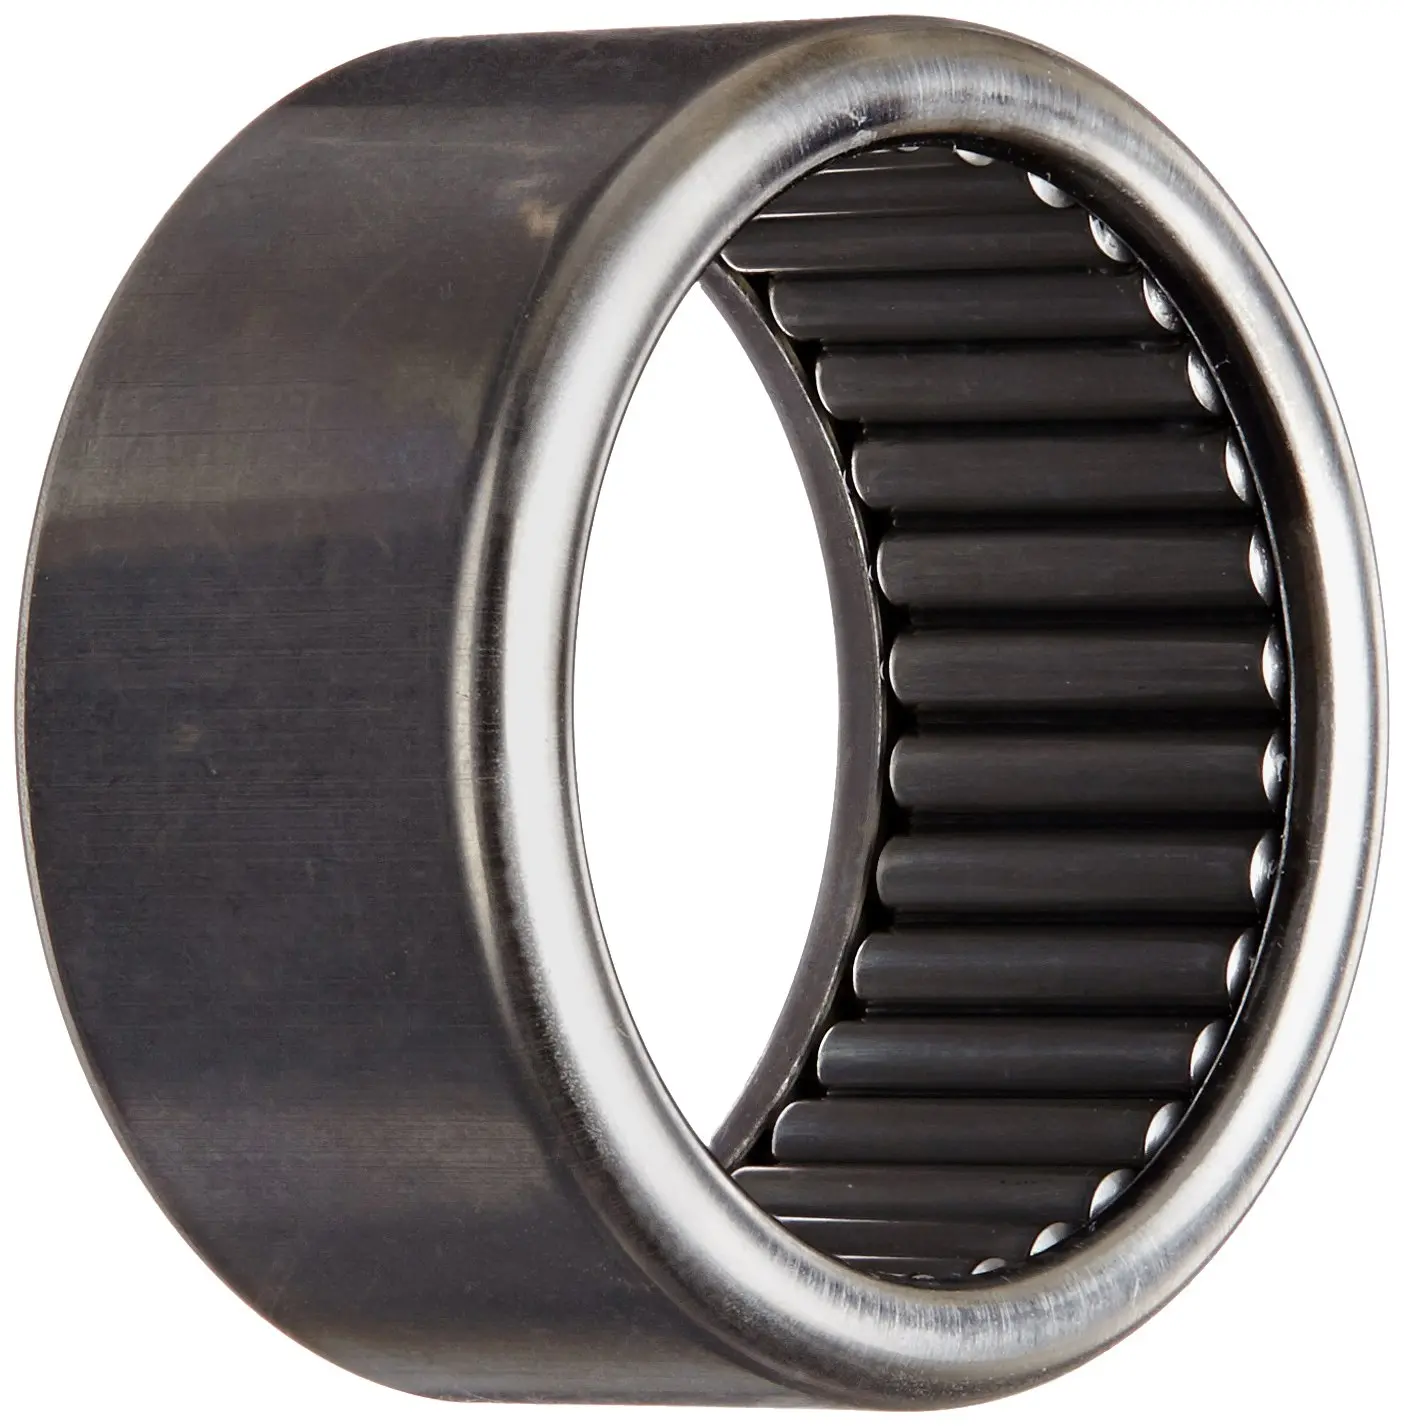 1//2 Width Open 9//16 ID Full Complement Drawn Cup Koyo B-98-OH Needle Roller Bearing Inch 3//4 OD Oil Hole